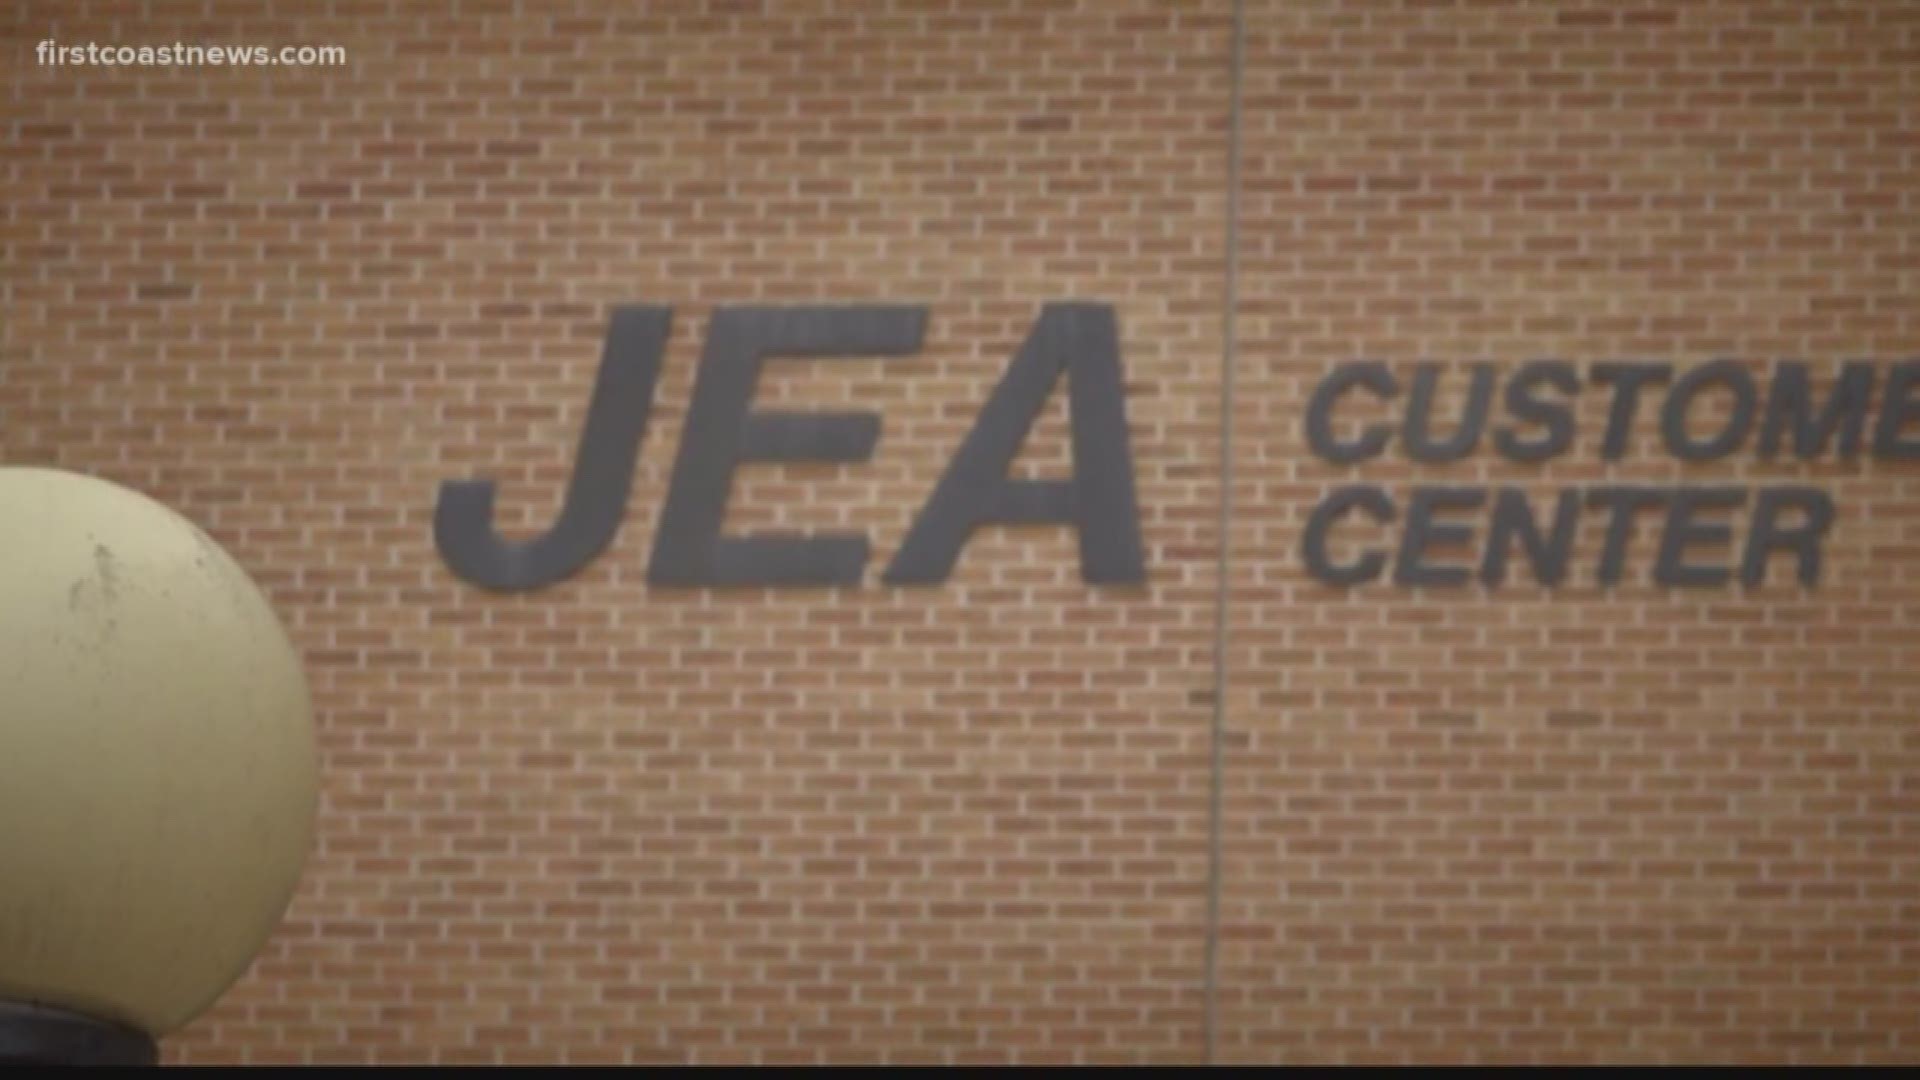 JEA previously said keeping the names confidential would help it make the process more competitive when the agency seeks to negotiate toward final offers.